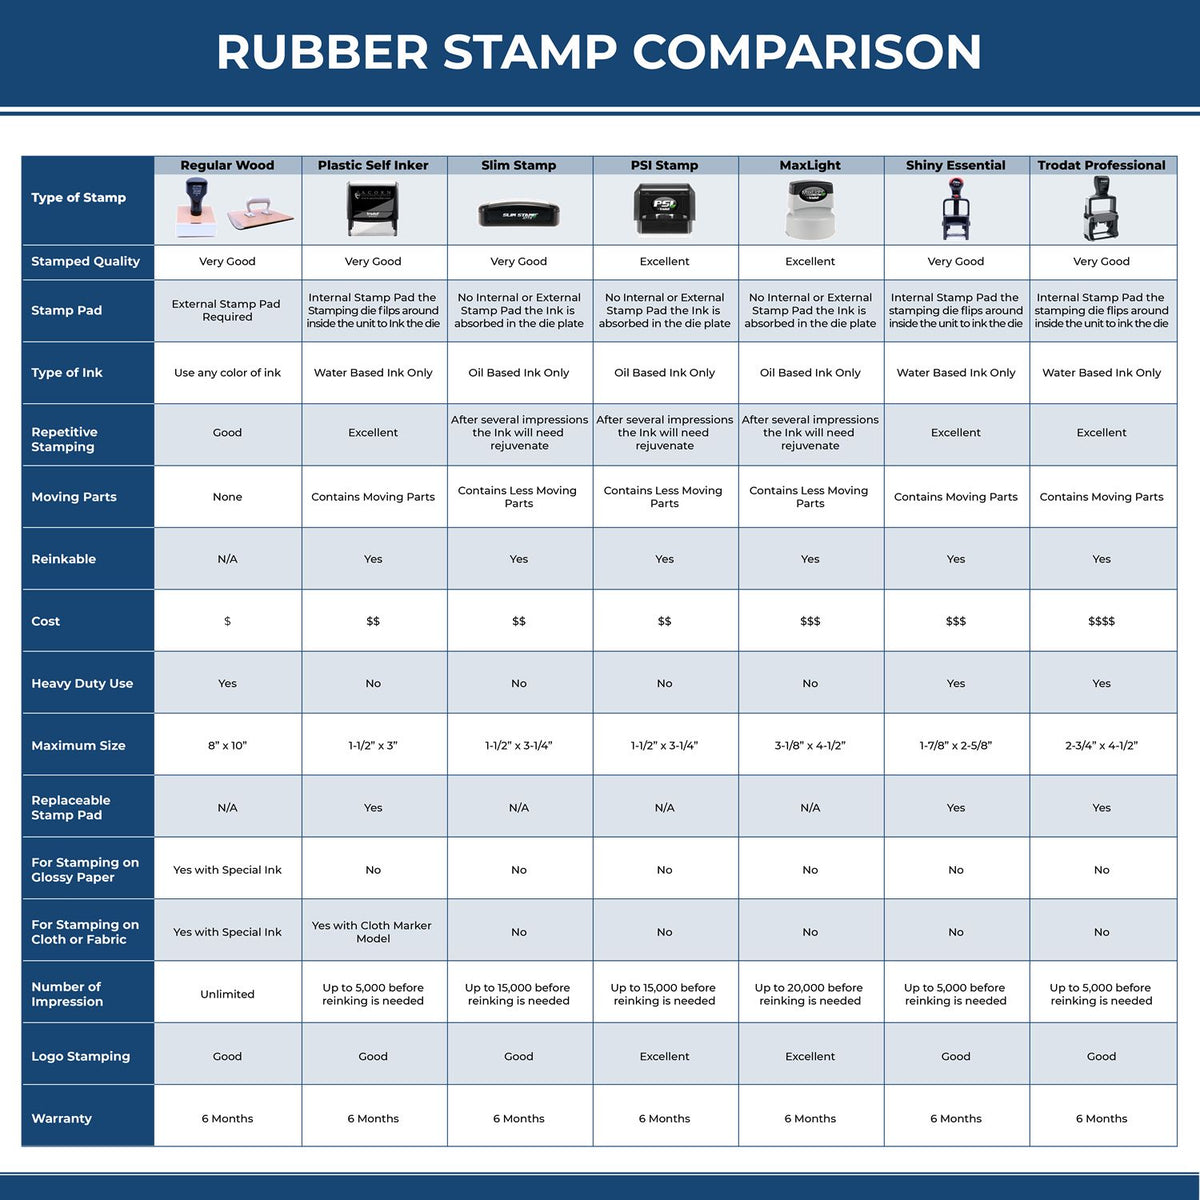 A comparison chart for the different types of mount models available for the Wyoming Professional Engineer Seal Stamp.